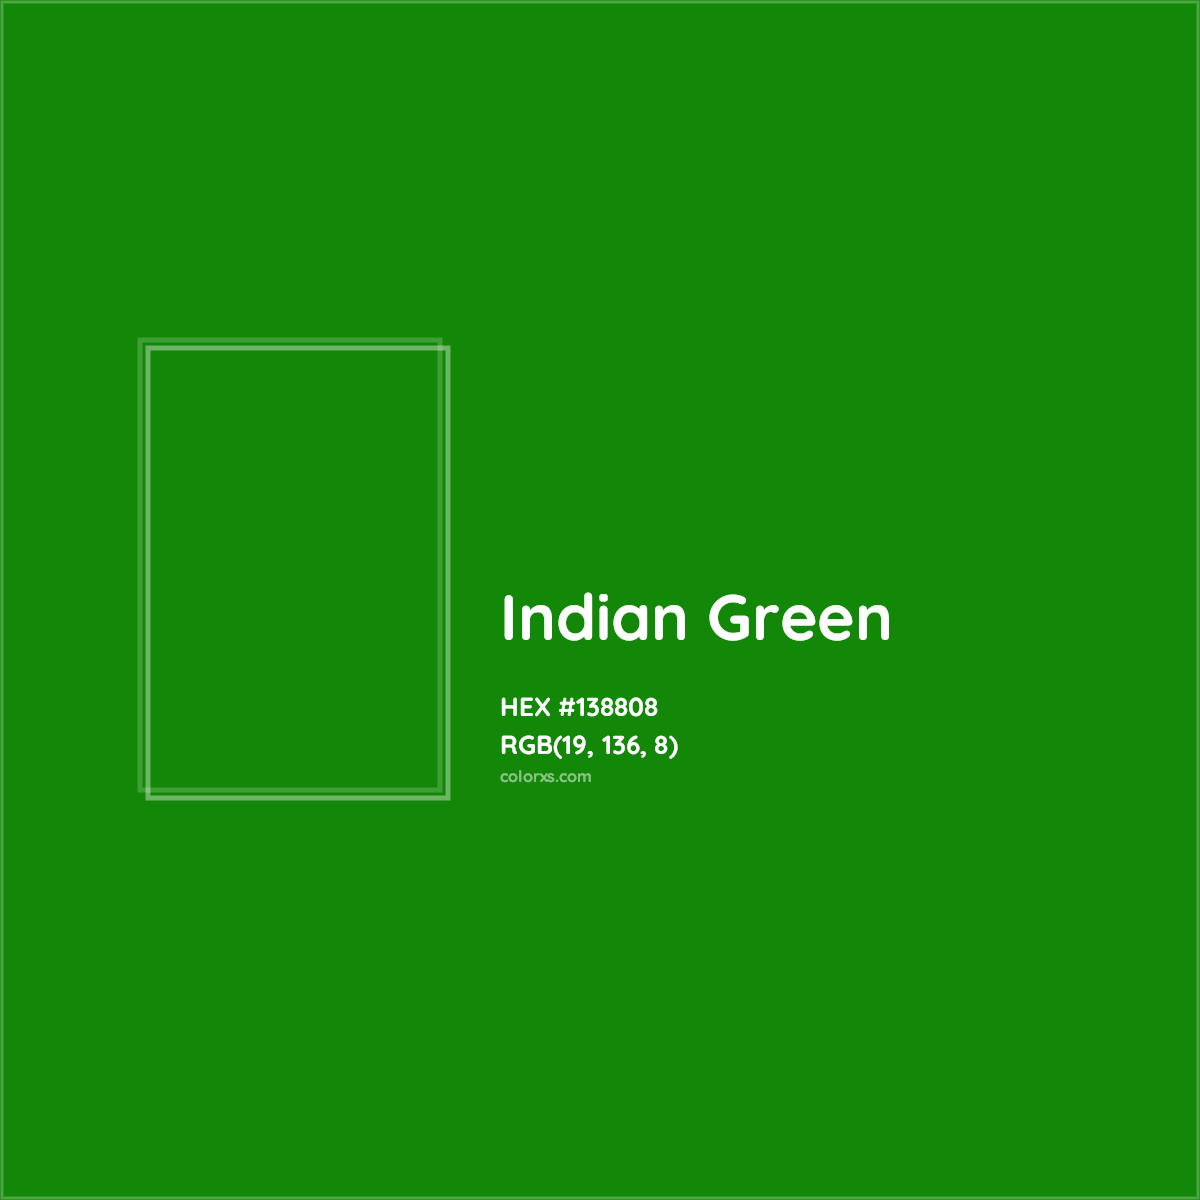 HEX #138808 Indian Green Other Flag - Color Code